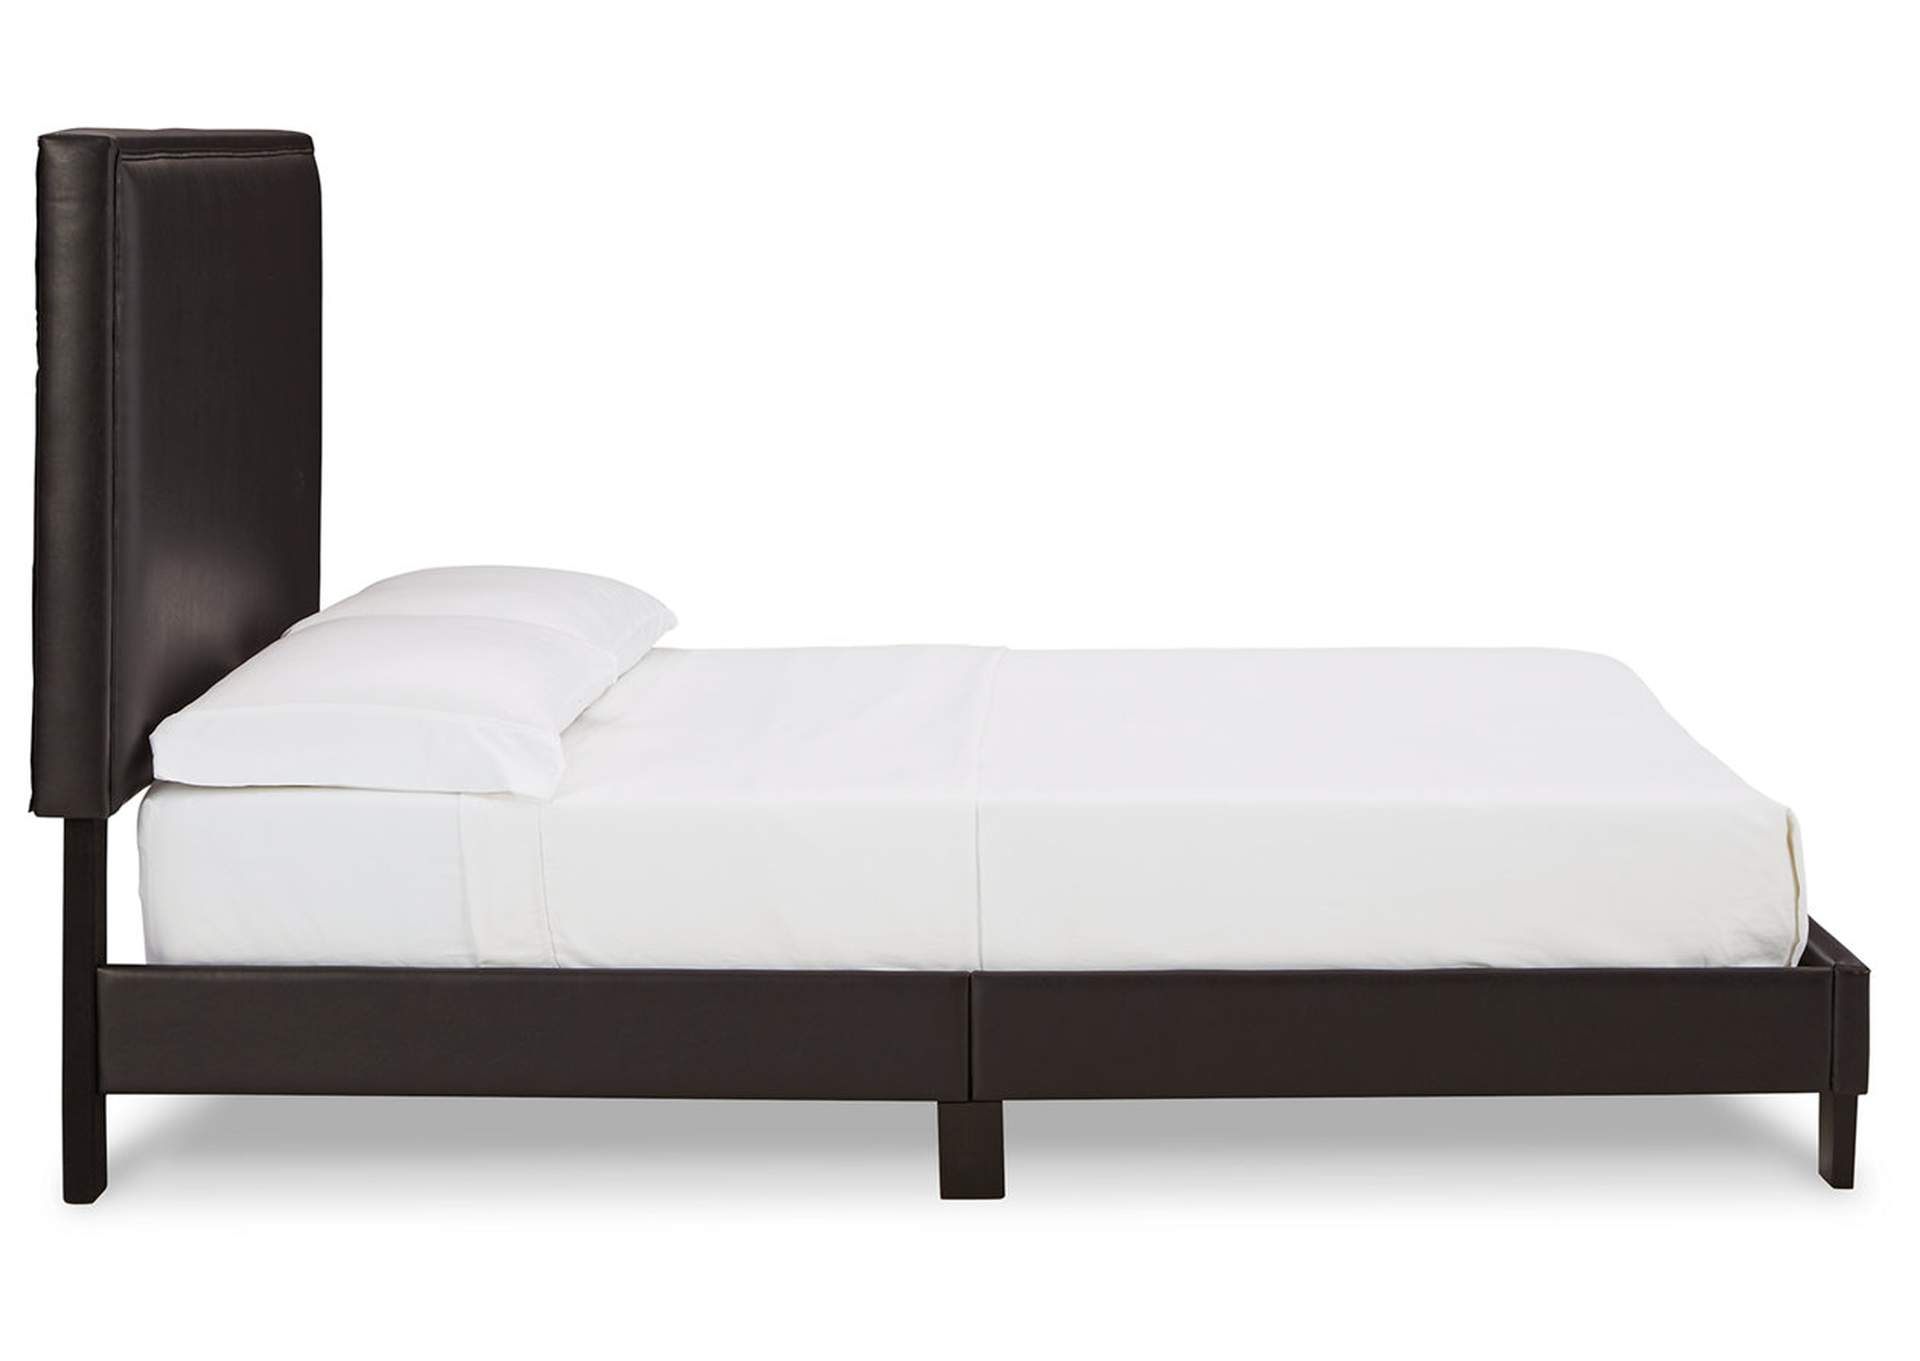 Mesling Queen Upholstered Bed,Signature Design By Ashley